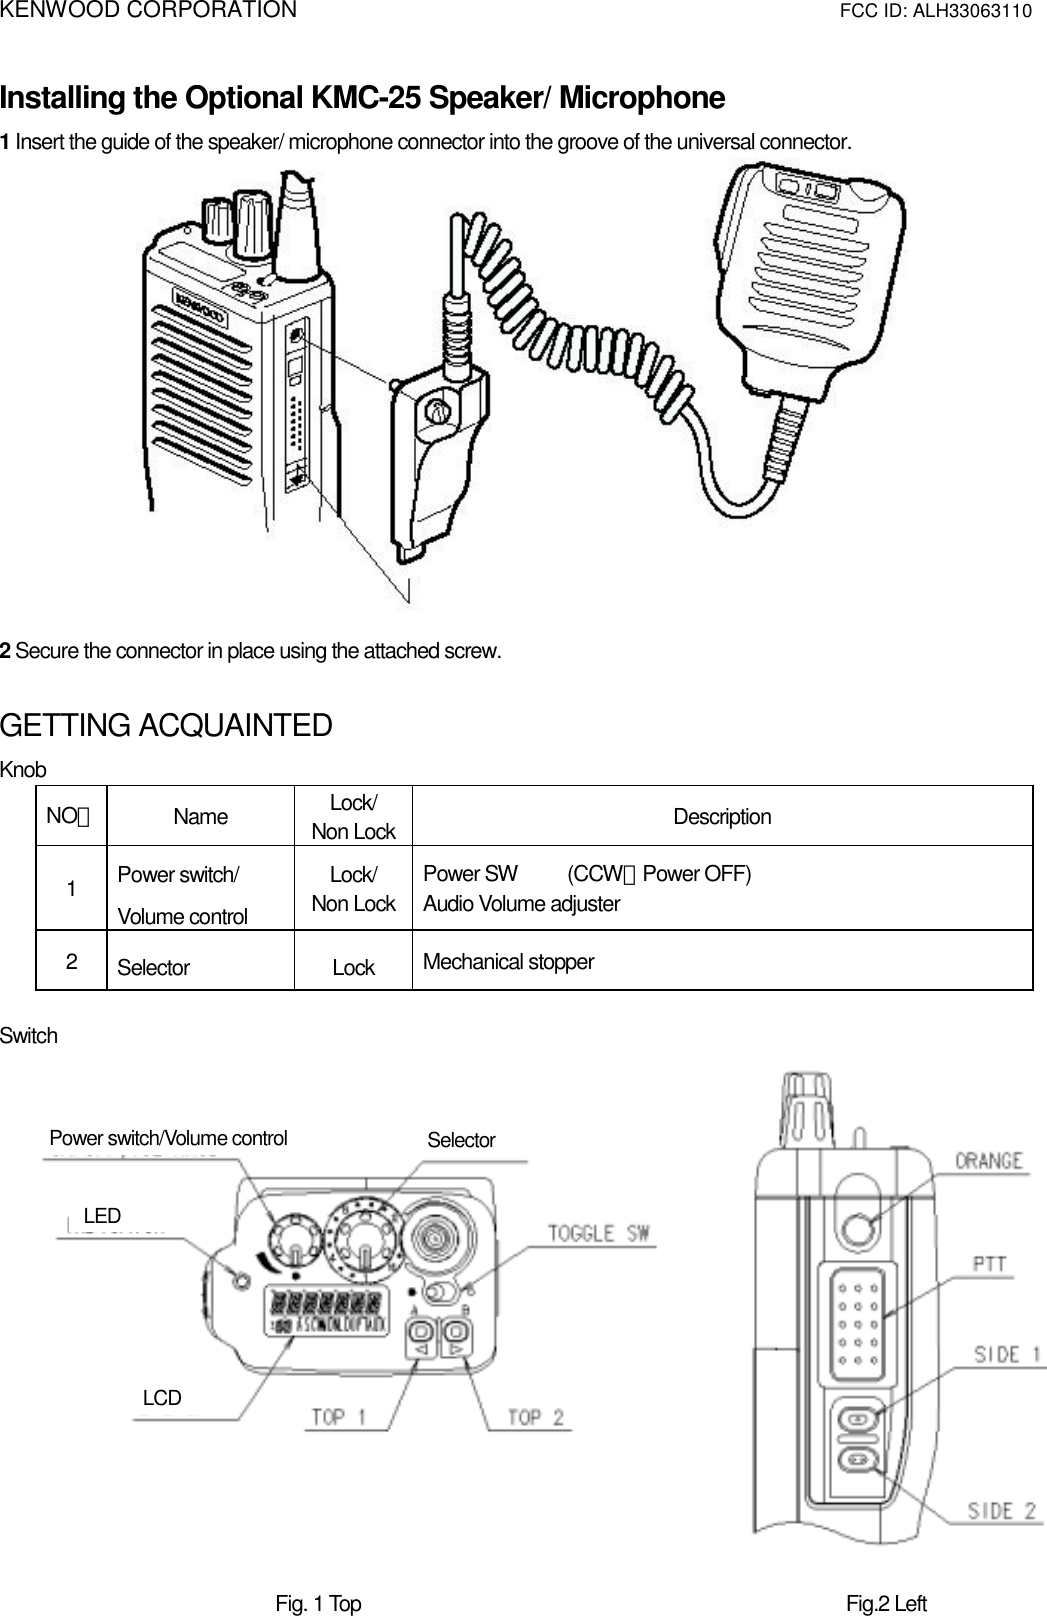 KENWOOD CORPORATION                        FCC ID: ALH33063110   Installing the Optional KMC-25 Speaker/ Microphone 1 Insert the guide of the speaker/ microphone connector into the groove of the universal connector.                 2 Secure the connector in place using the attached screw.  GETTING ACQUAINTED Knob NO． Name  Lock/ Non Lock  Description 1  Power switch/ Volume control Lock/ Non Lock Power SW     (CCW：Power OFF)   Audio Volume adjuster   2  Selector Lock Mechanical stopper  Switch                                Fig. 1 Top                             Fig.2 Left     LCD LED Power switch/Volume control  Selector 